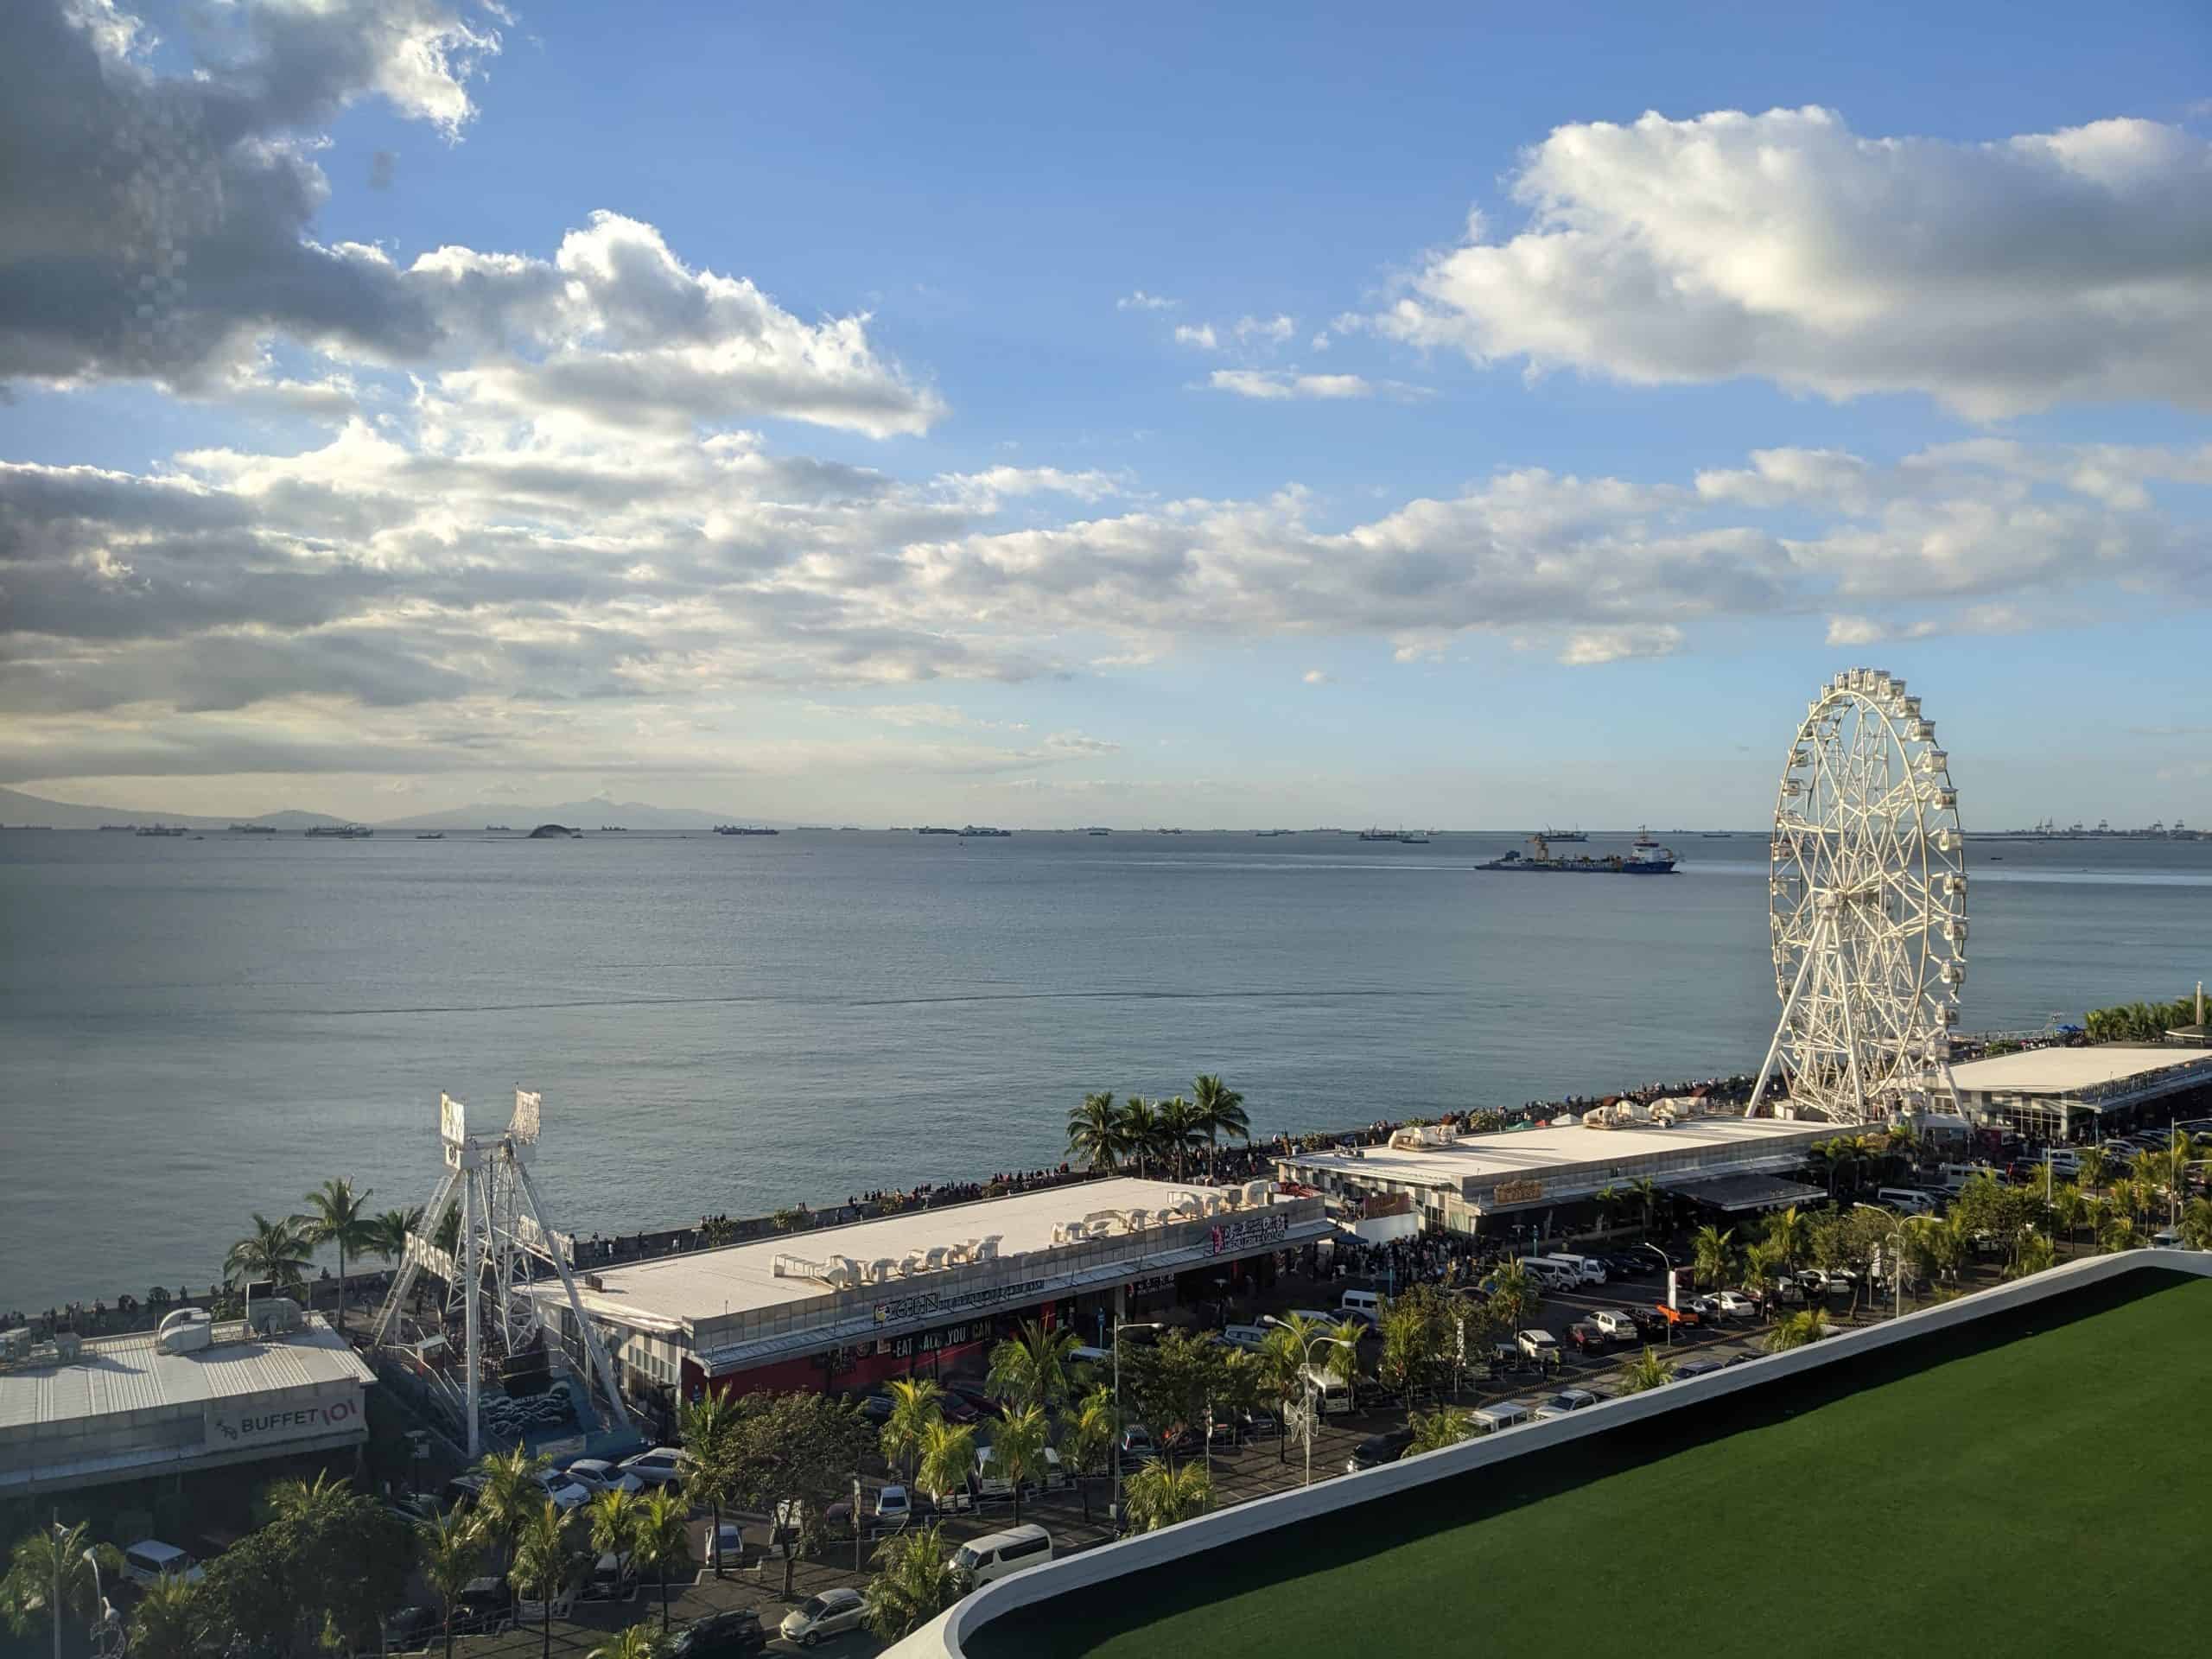 Daytime view of Manila Bay, the boardwalk, and a Ferris wheel